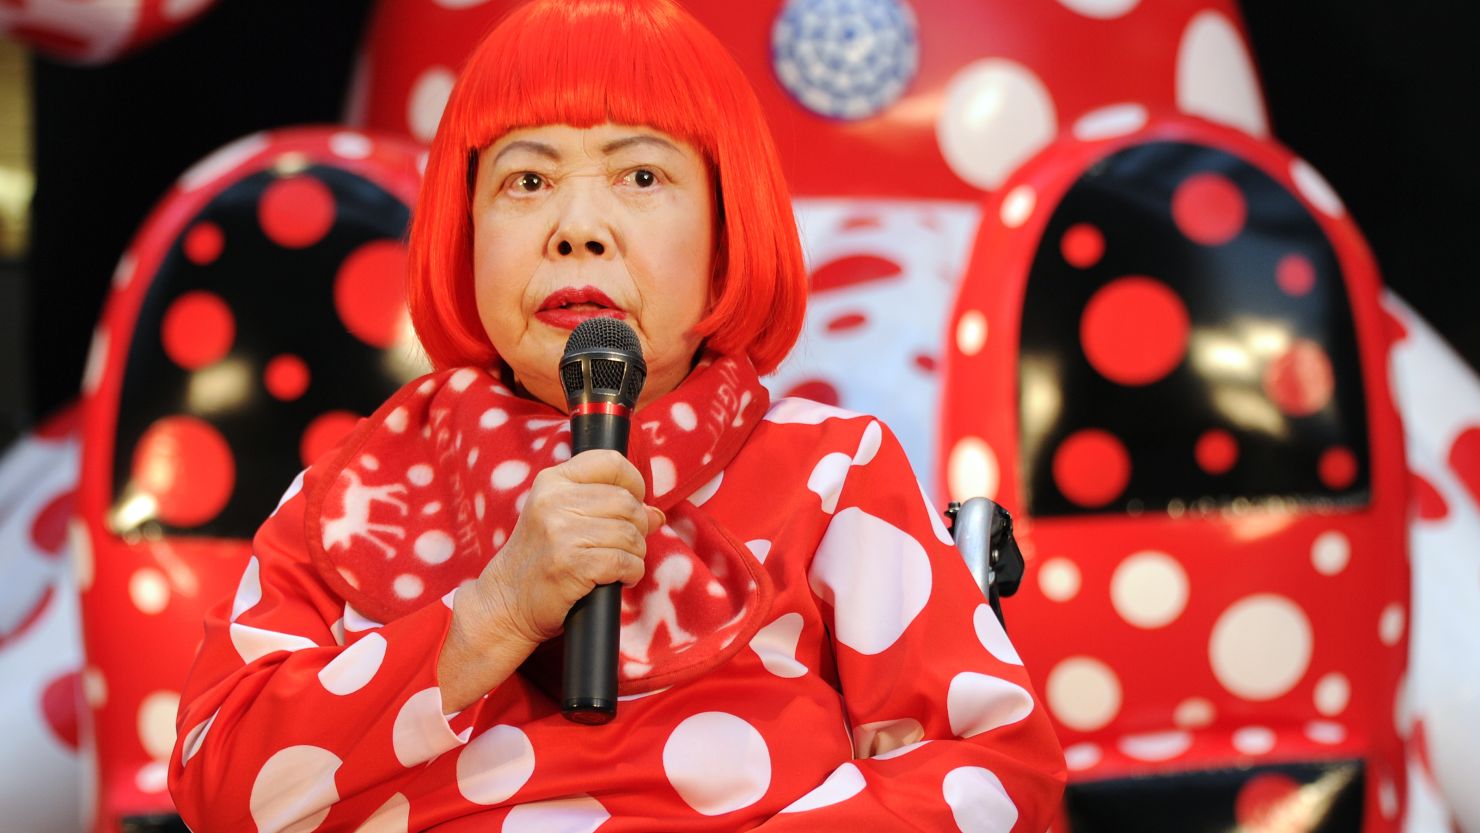 Japanese avant-garde artist Yayoi Kusama answers questions during a press preview for an 32-hour art event at Roppongi shopping district in Tokyo on March 22, 2012. AFP PHOTO/Toru YAMANAKA (Photo credit should read TORU YAMANAKA/AFP/Getty Images)